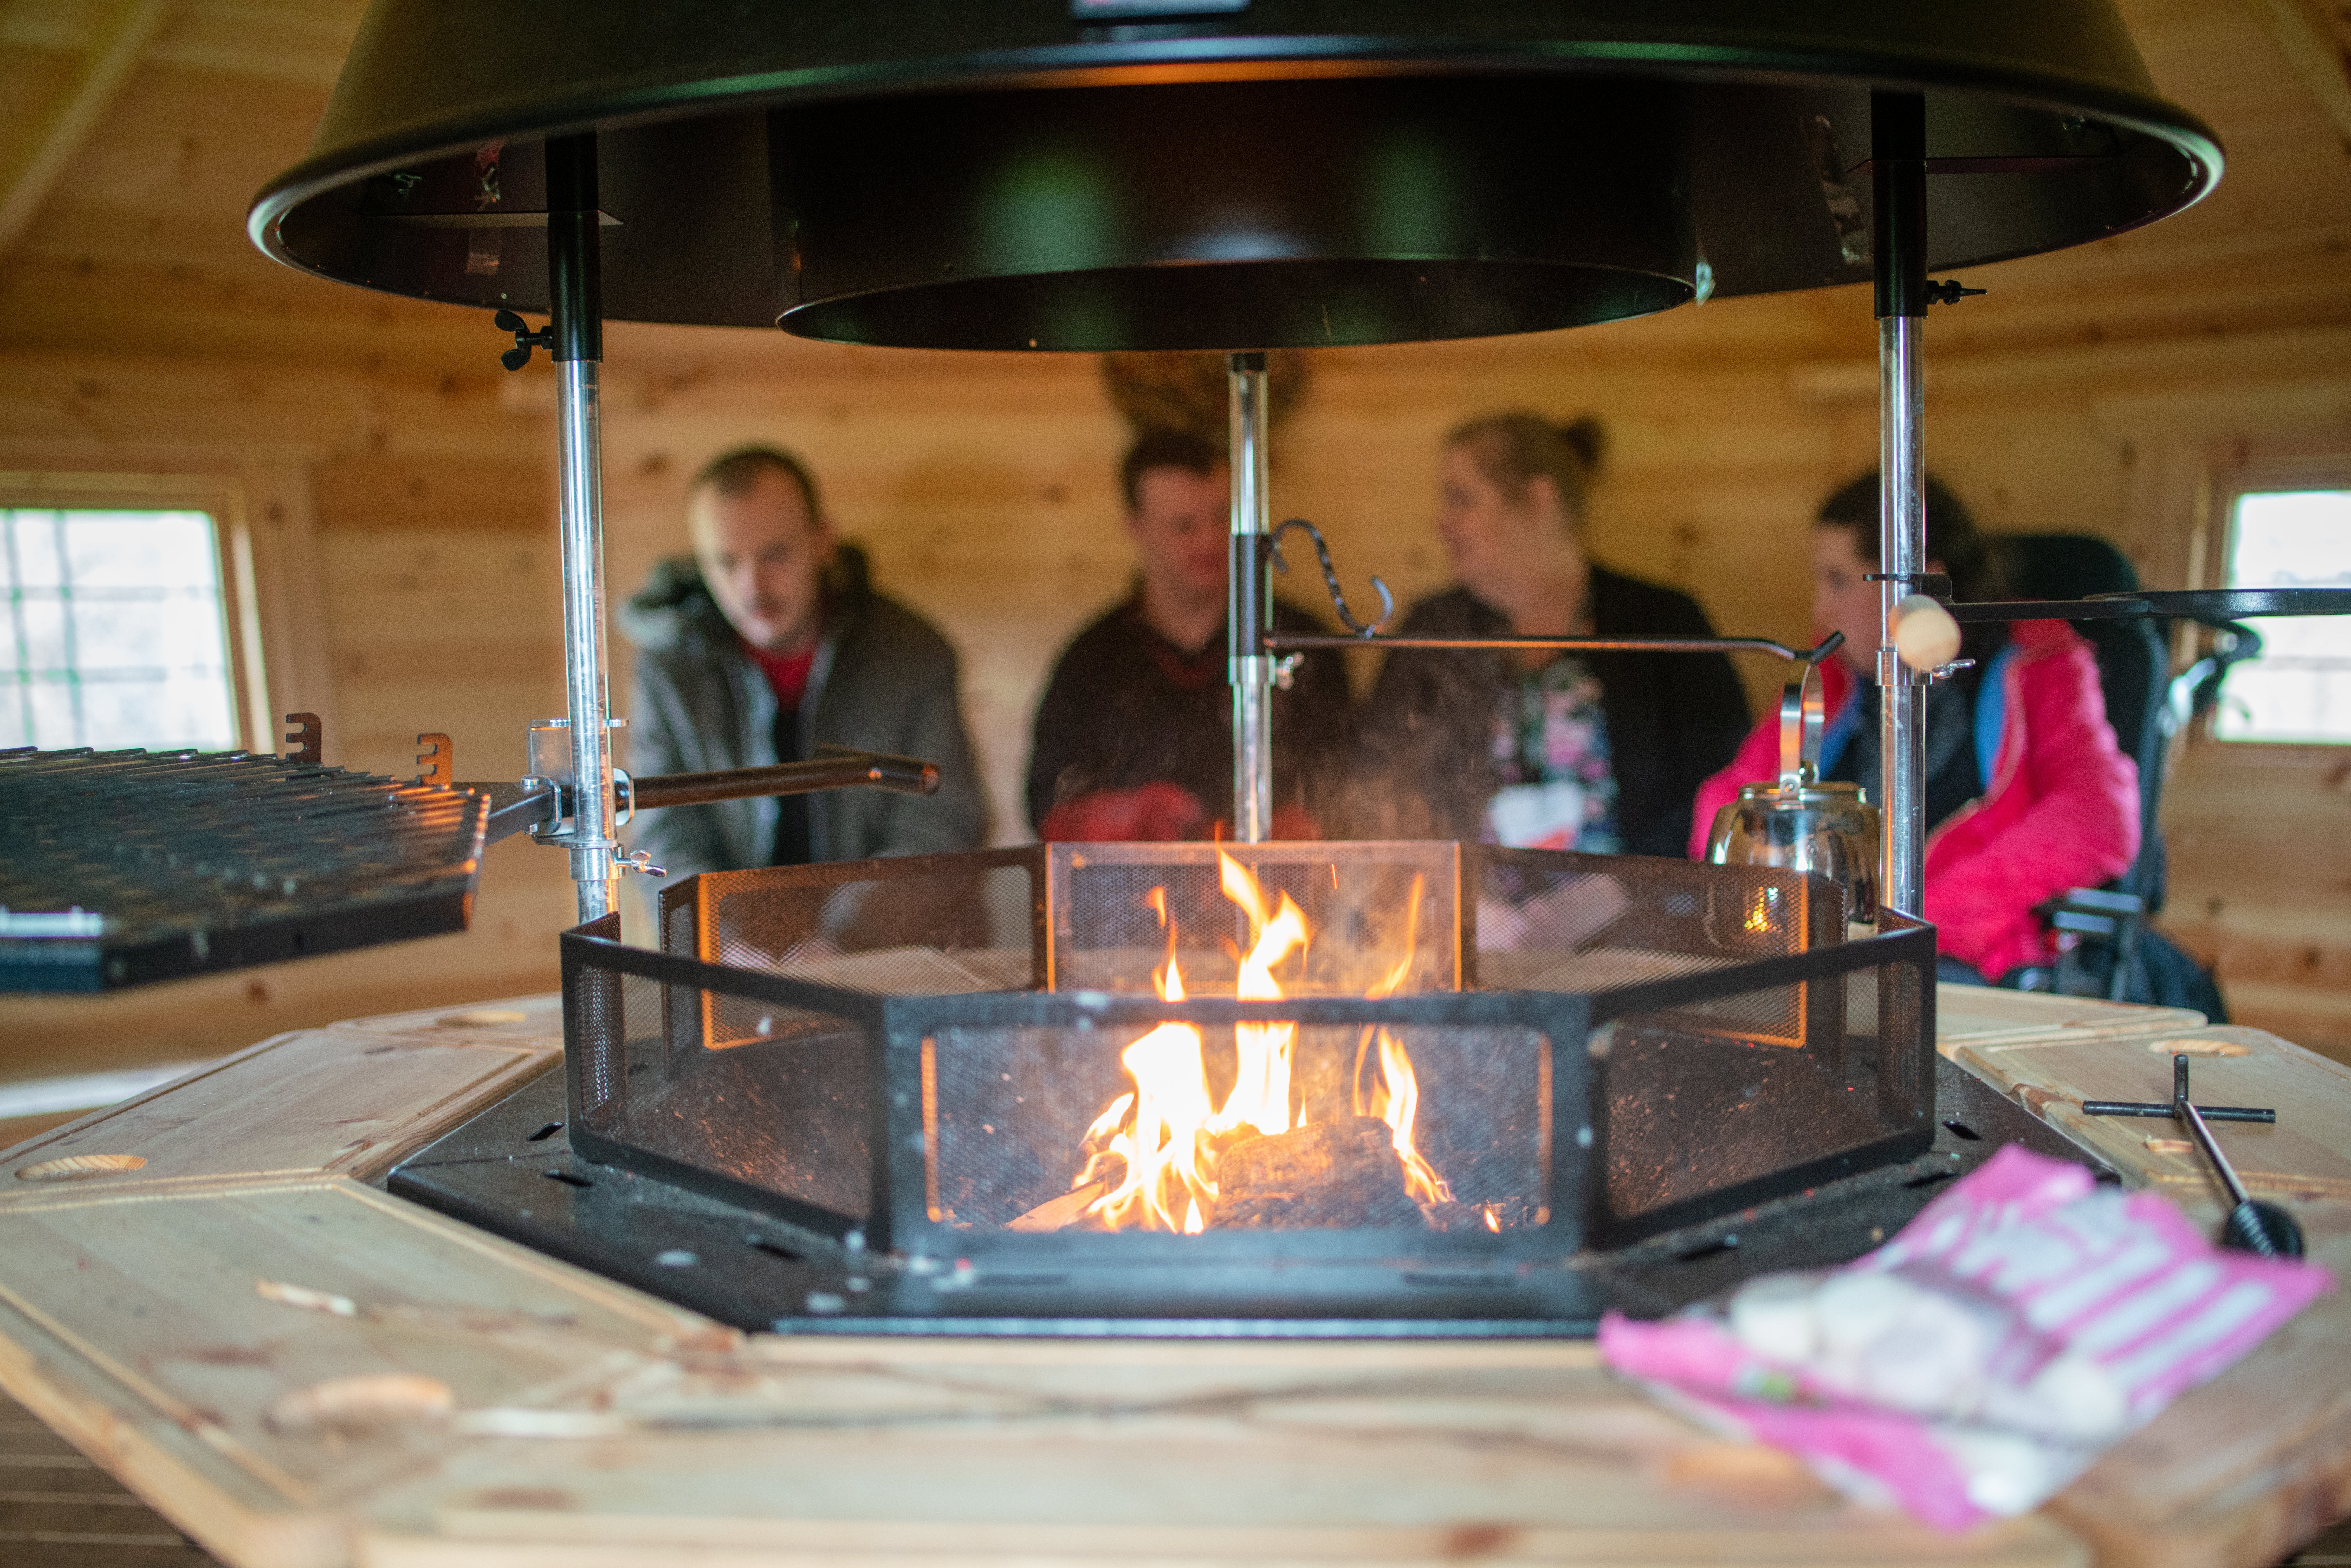 School BBQ Cabin interior with fire lit